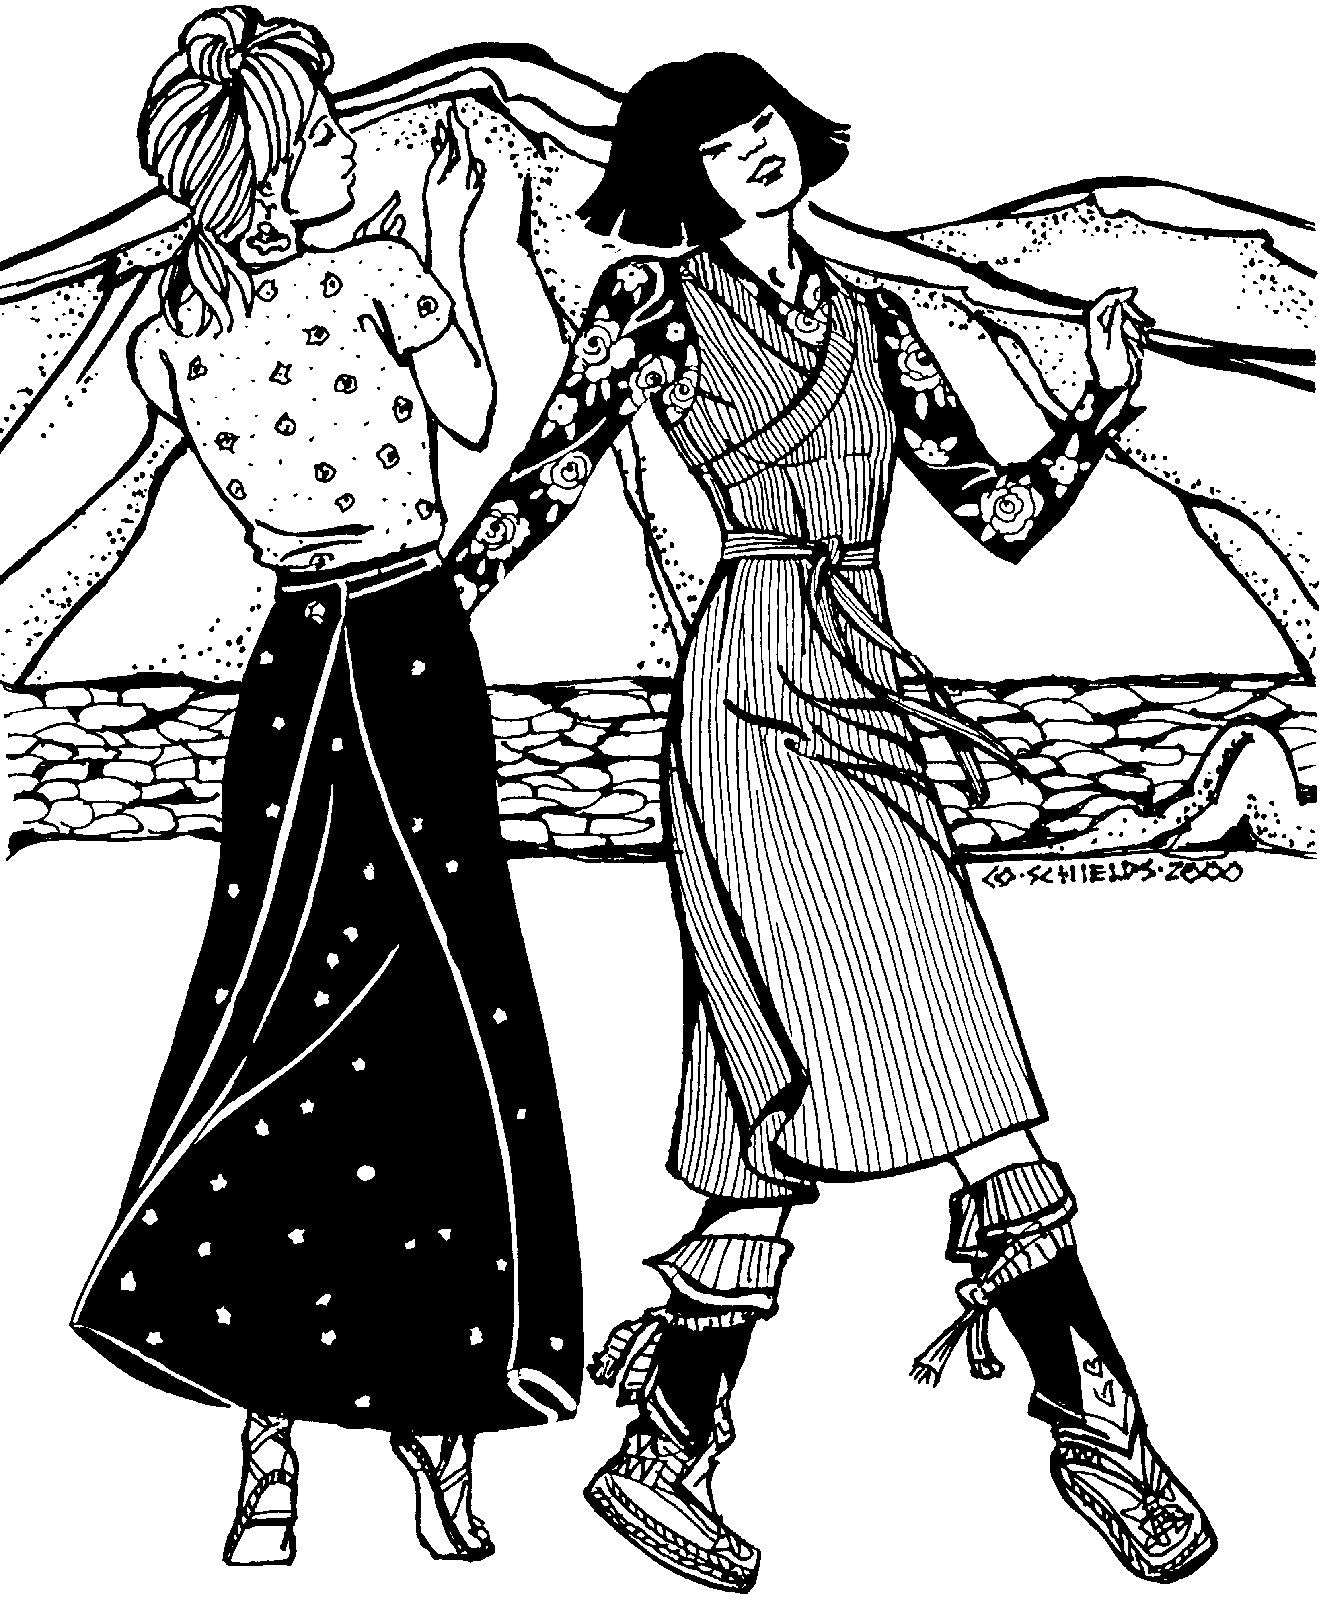 Black and white pen and ink drawing by artist Gretchen Shields.  Two women dancing side by side with mountains in background. Woman on left is turned and shows the back wrap of the chupa inspired skirt. Woman on the right wears the chupa jumper and is facing forward.